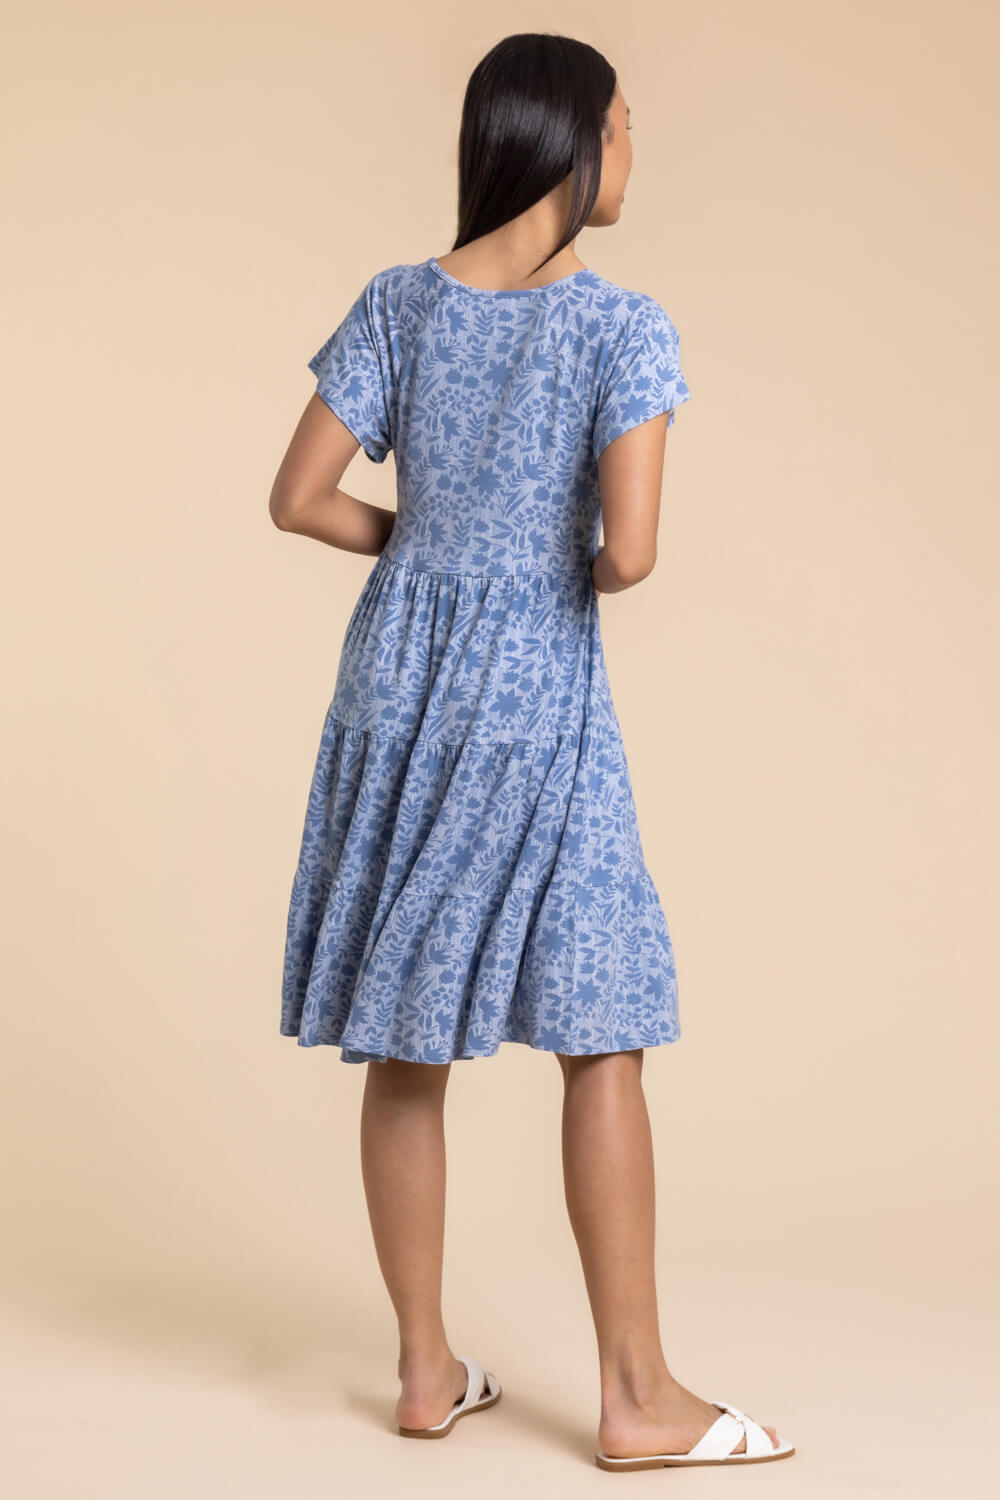 Blue Tiered Floral Print Stretch Dress, Image 2 of 4